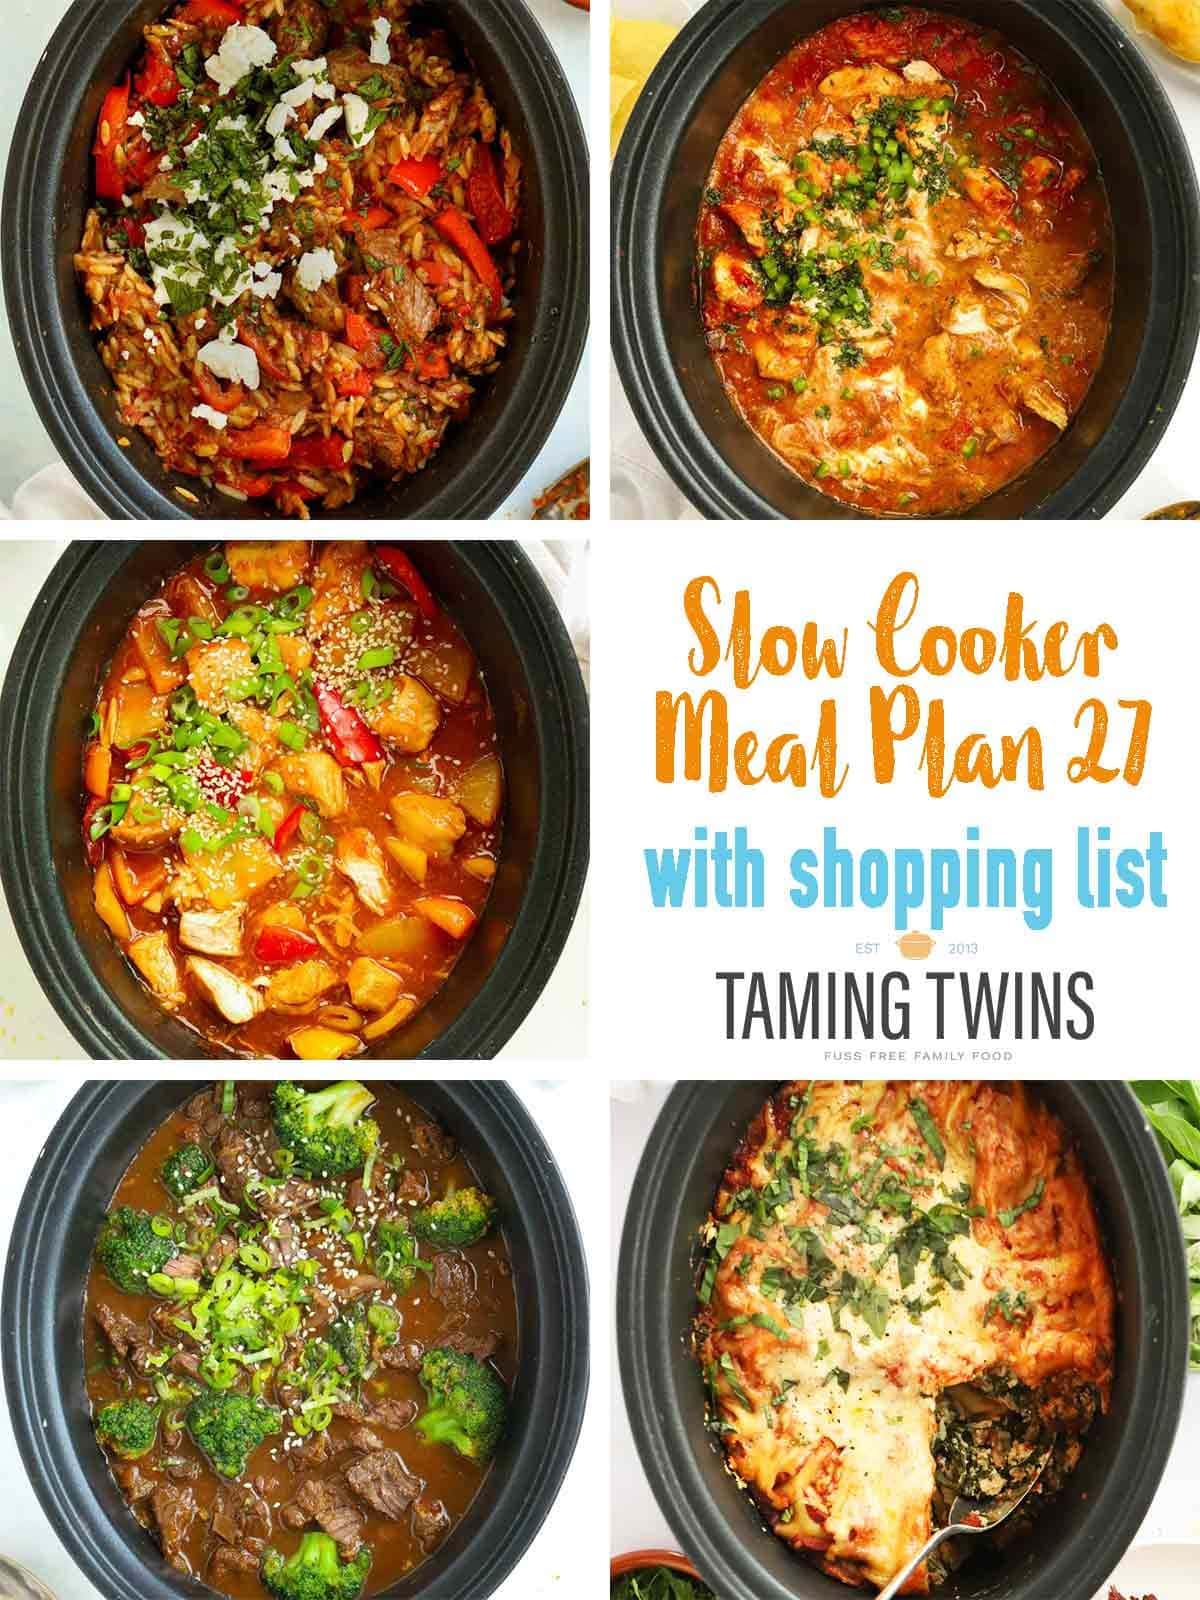 Meal Plans - Taming Twins